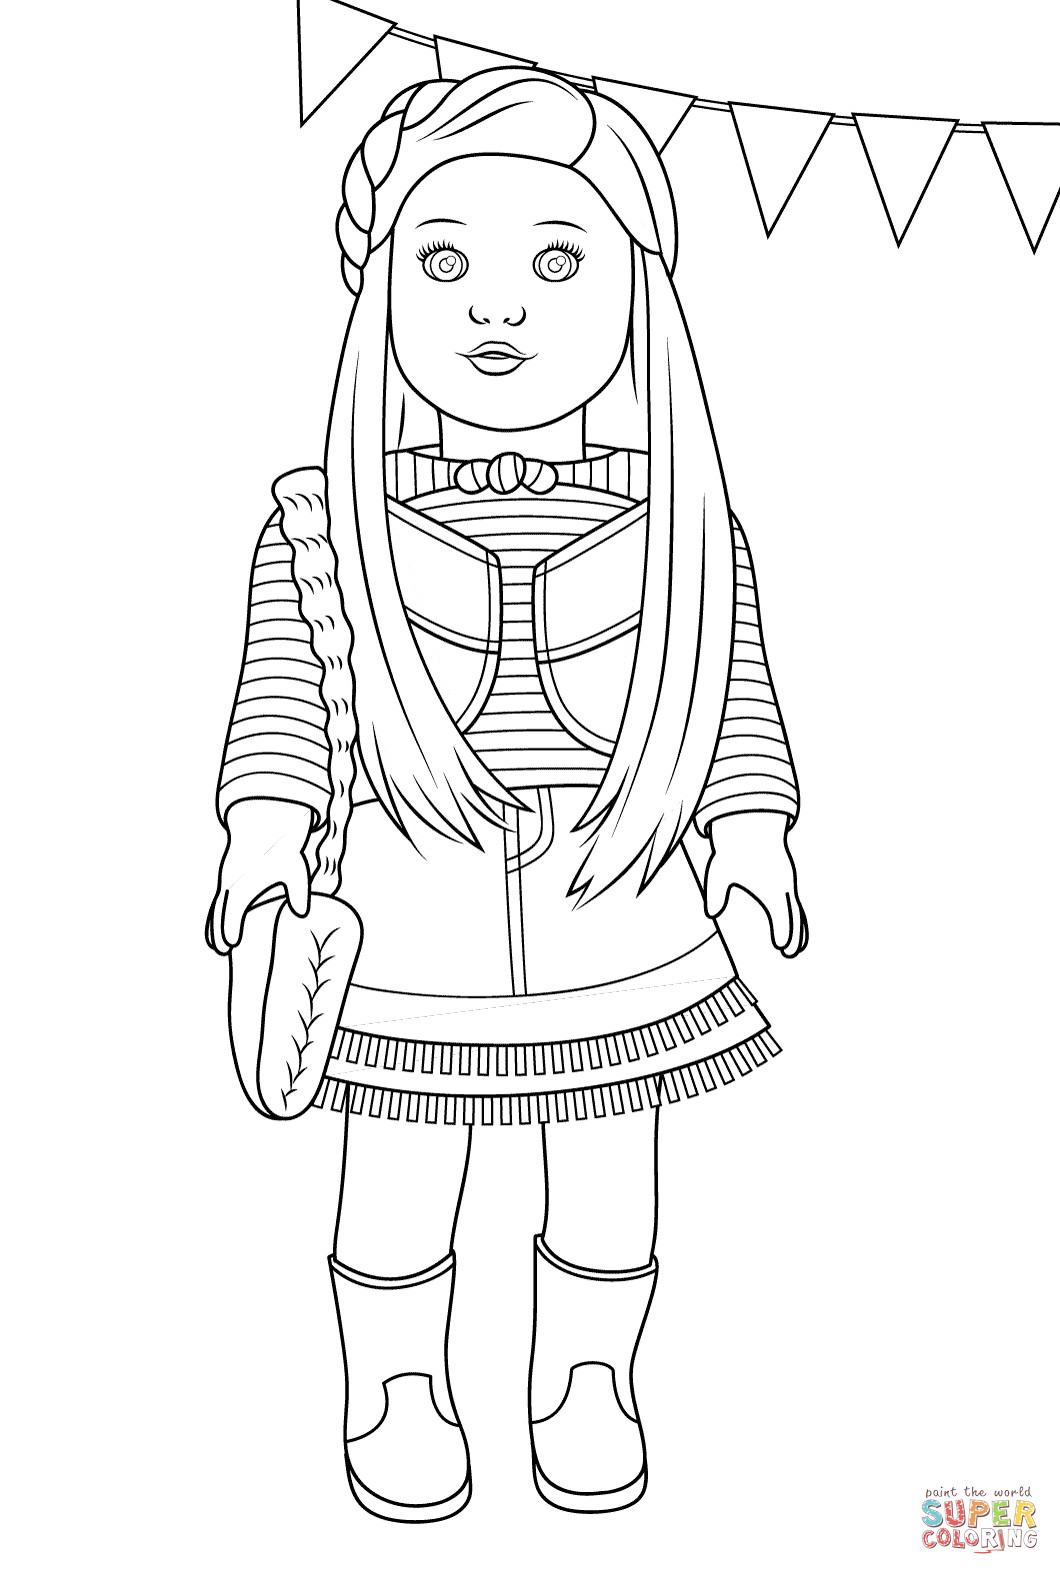 American Girl Dolls Coloring Pages
 American Girl Mckenna coloring page